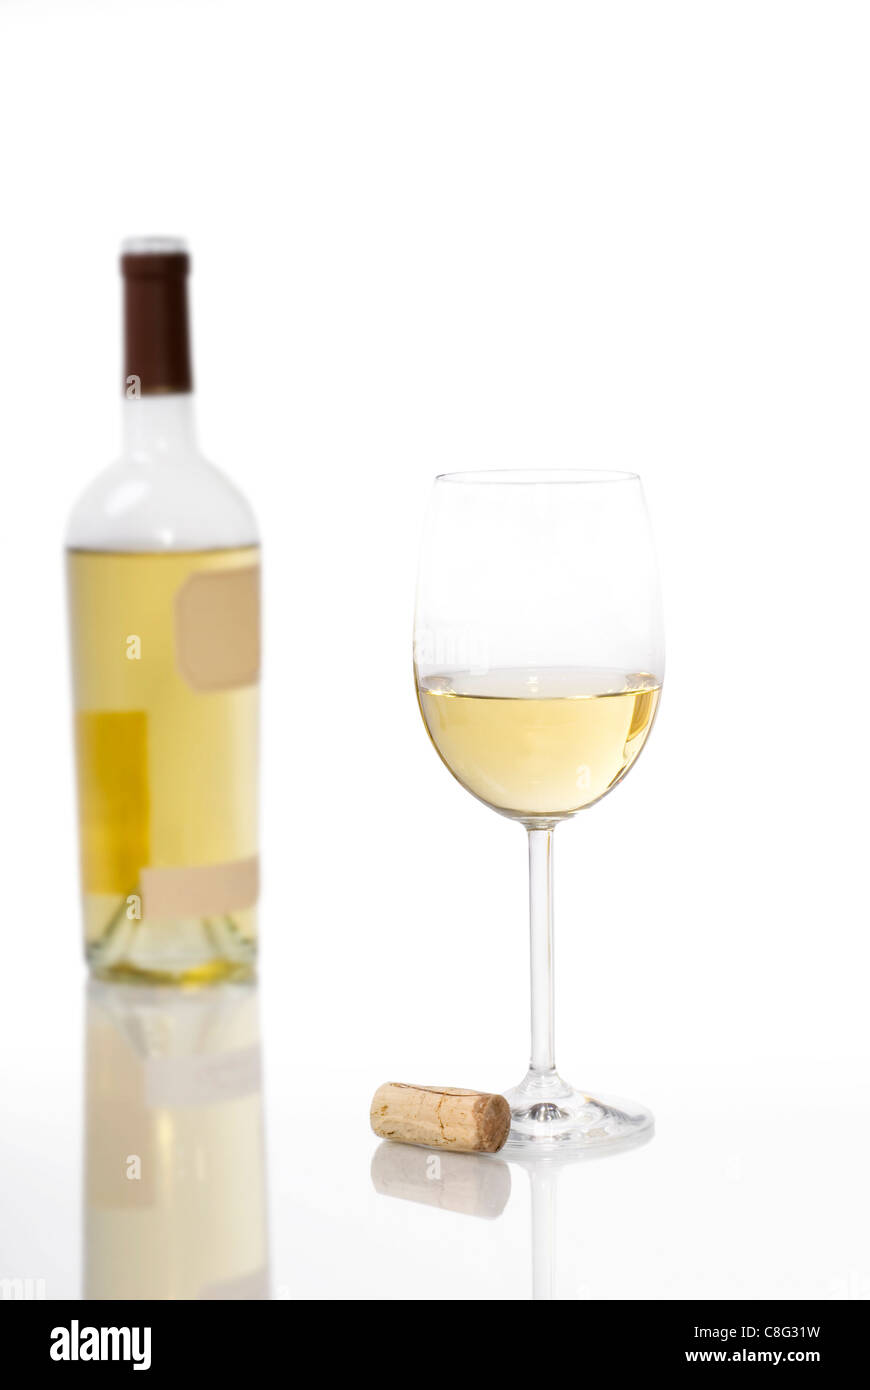 Download A Glass Of White Wine And Cork With The Open Bottle Out Of Focus In Stock Photo Alamy PSD Mockup Templates